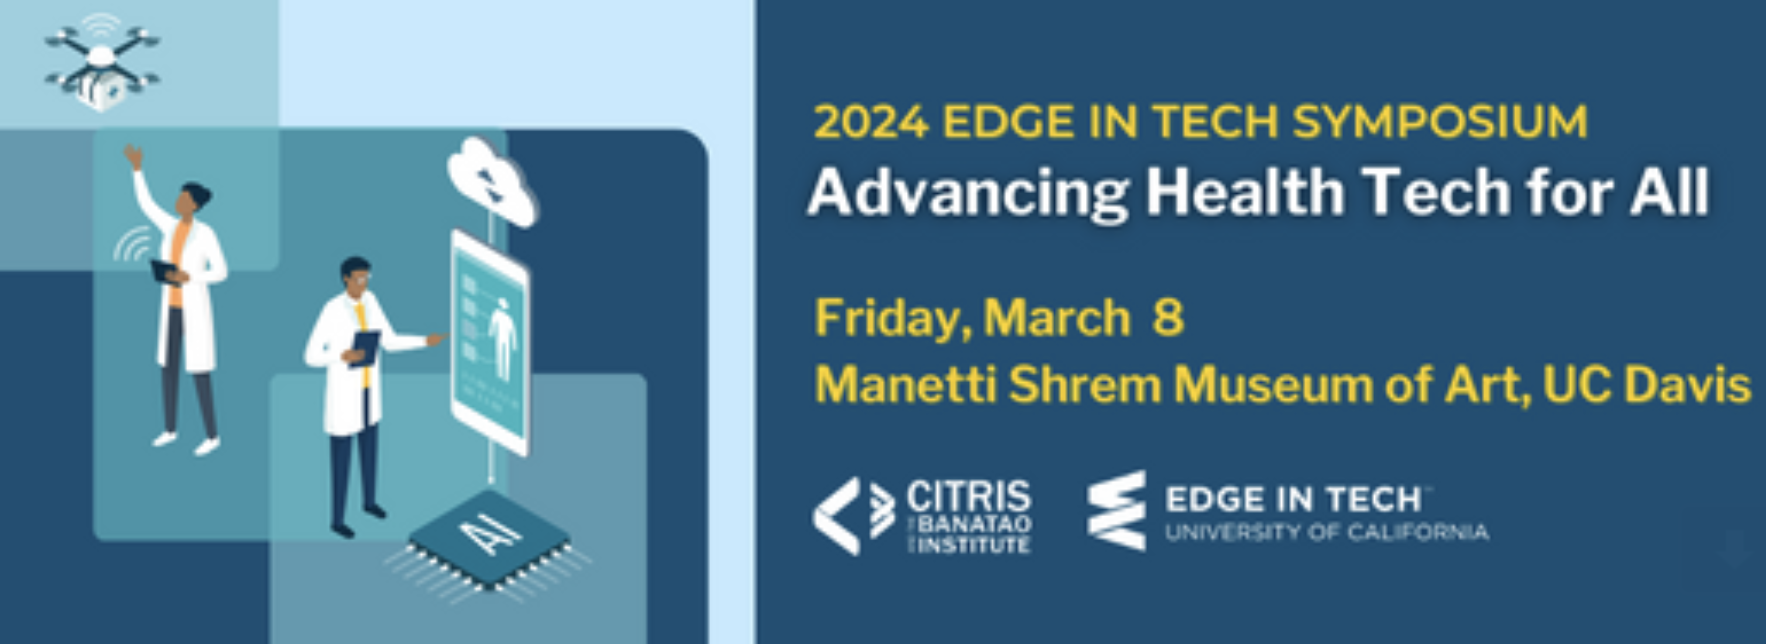 CITRIS and the Banatao Institute 2024 EDGE in Tech Symposium: Advancing Health Tech for All